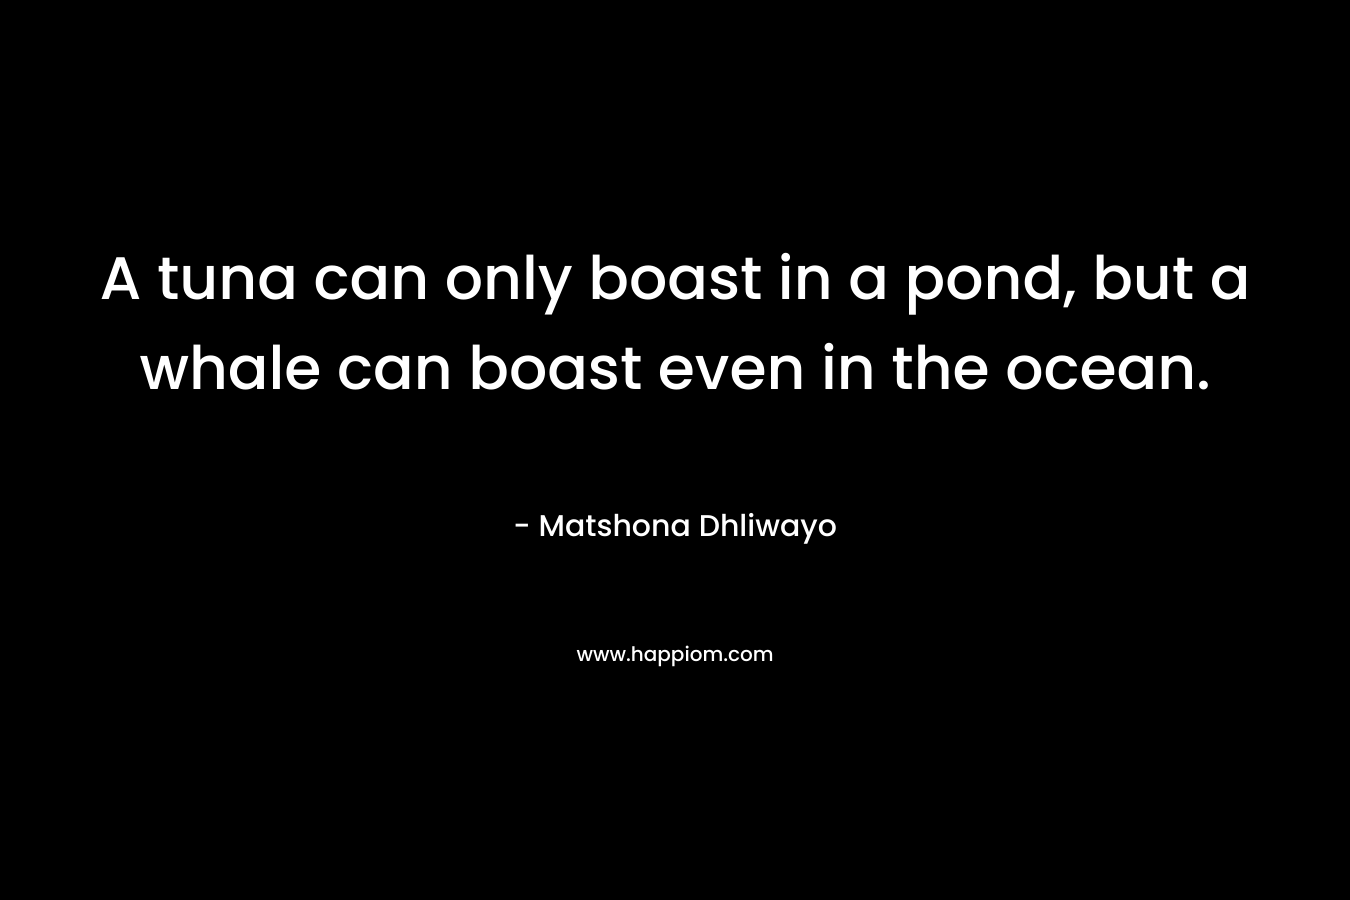 A tuna can only boast in a pond, but a whale can boast even in the ocean. – Matshona Dhliwayo